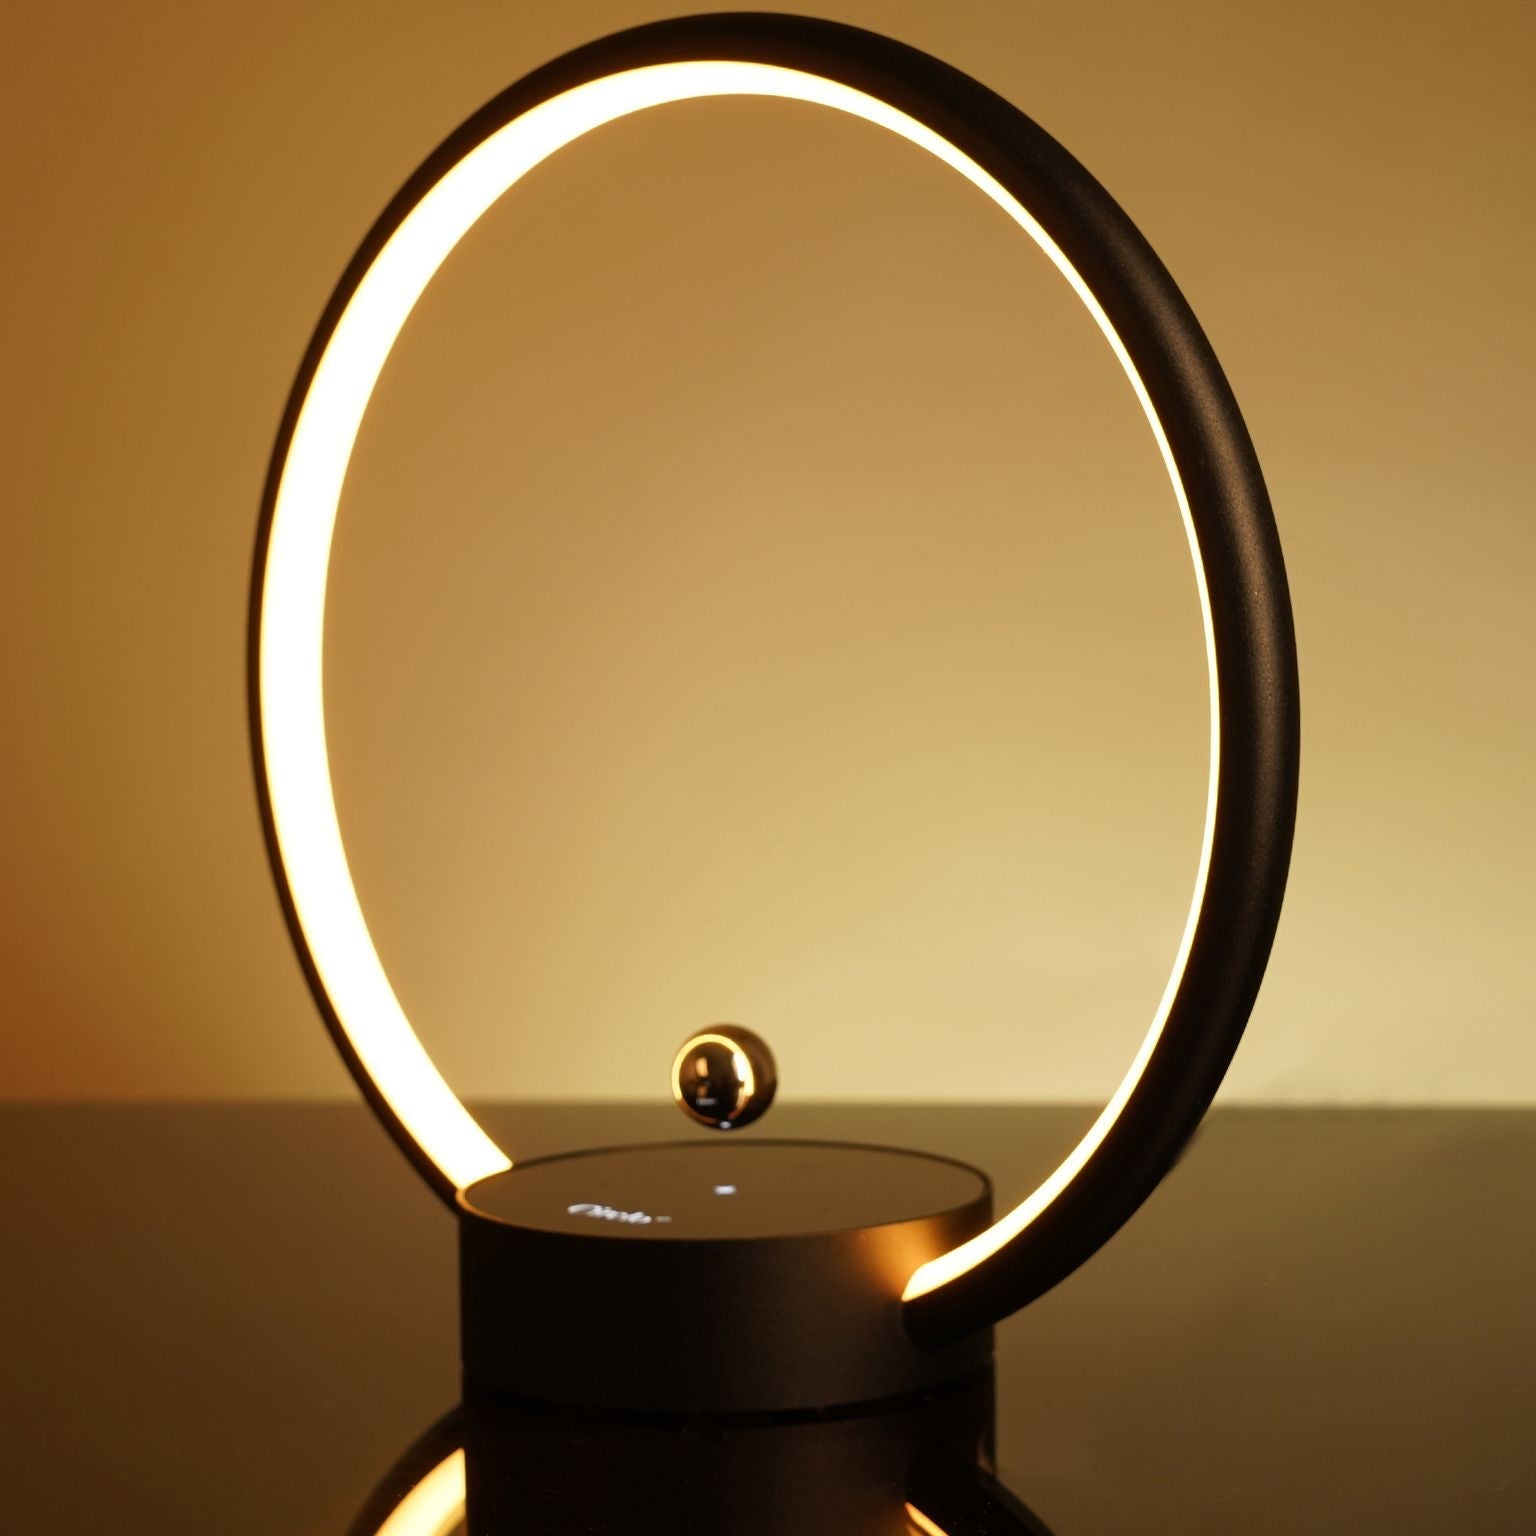 Modern Circle Table Lamp in Aluminum alloy with Dimmable Touch Control for Reading, Bedroom & Office, Black, Wood & White